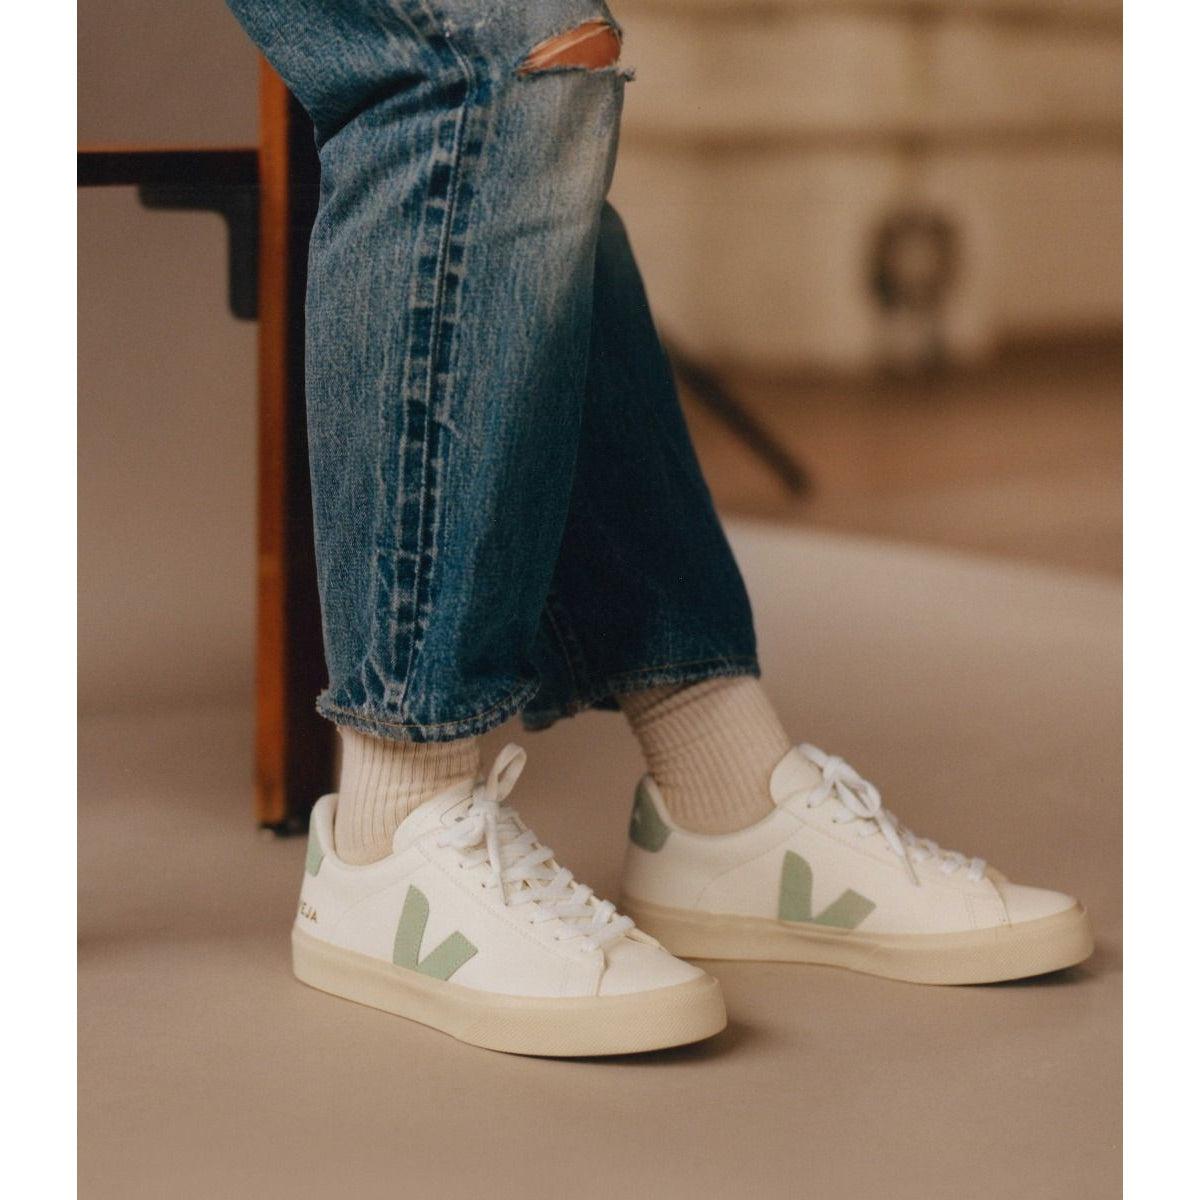 CAMPO EXTRA WHITE MATCHA-LADIES SNEAKERS-VEJA-JB Evans Fashions & Footwear